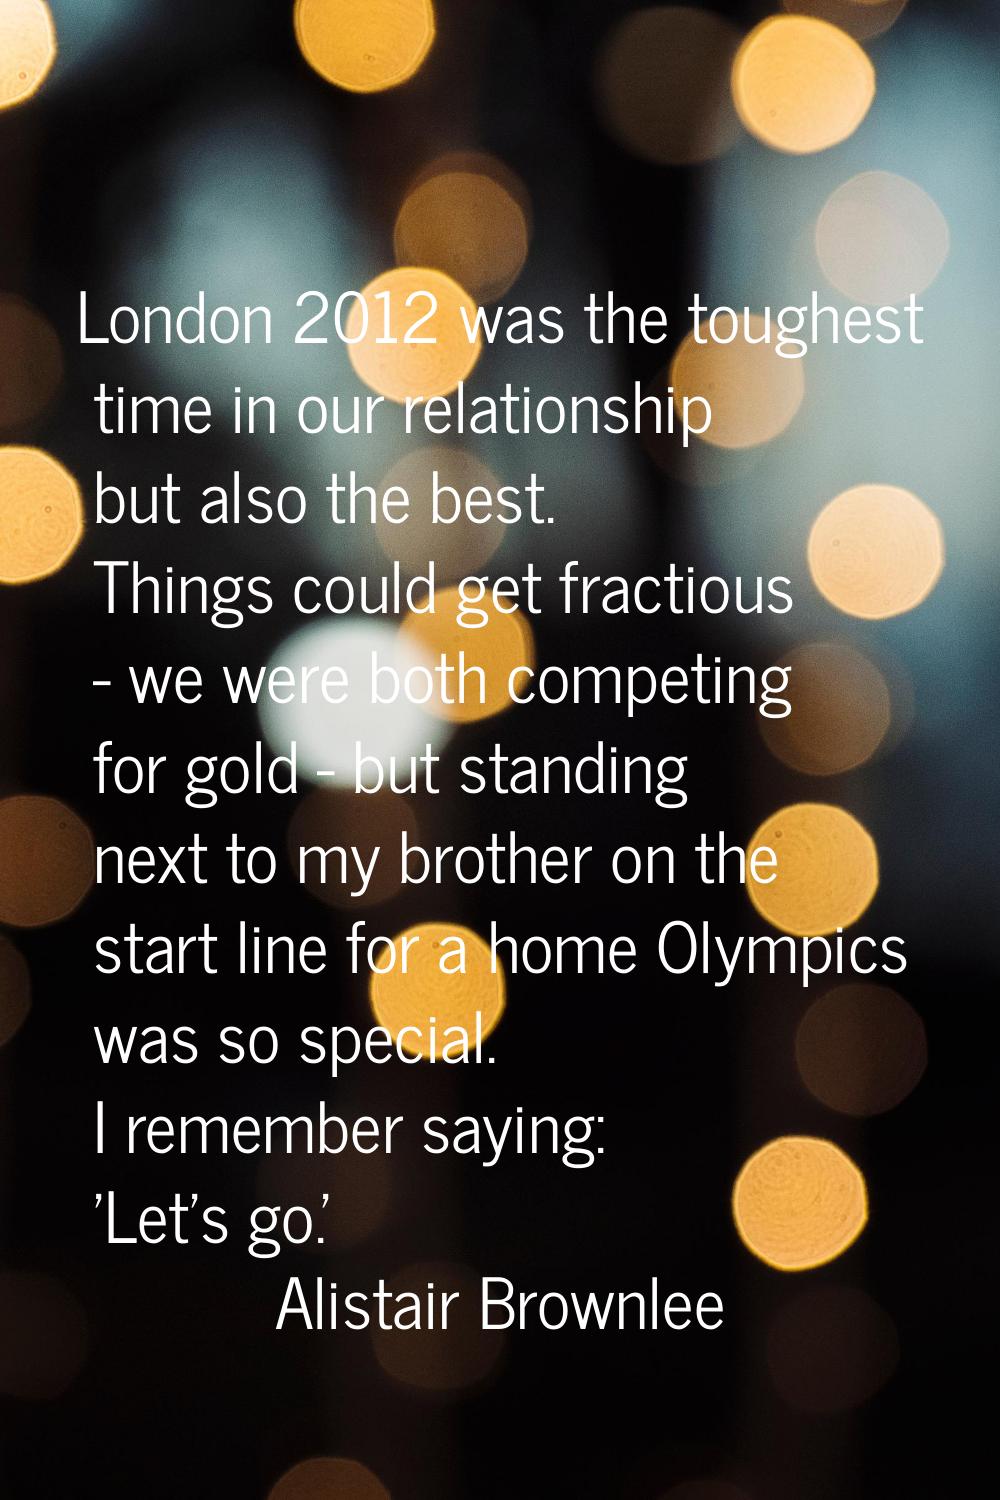 London 2012 was the toughest time in our relationship but also the best. Things could get fractious